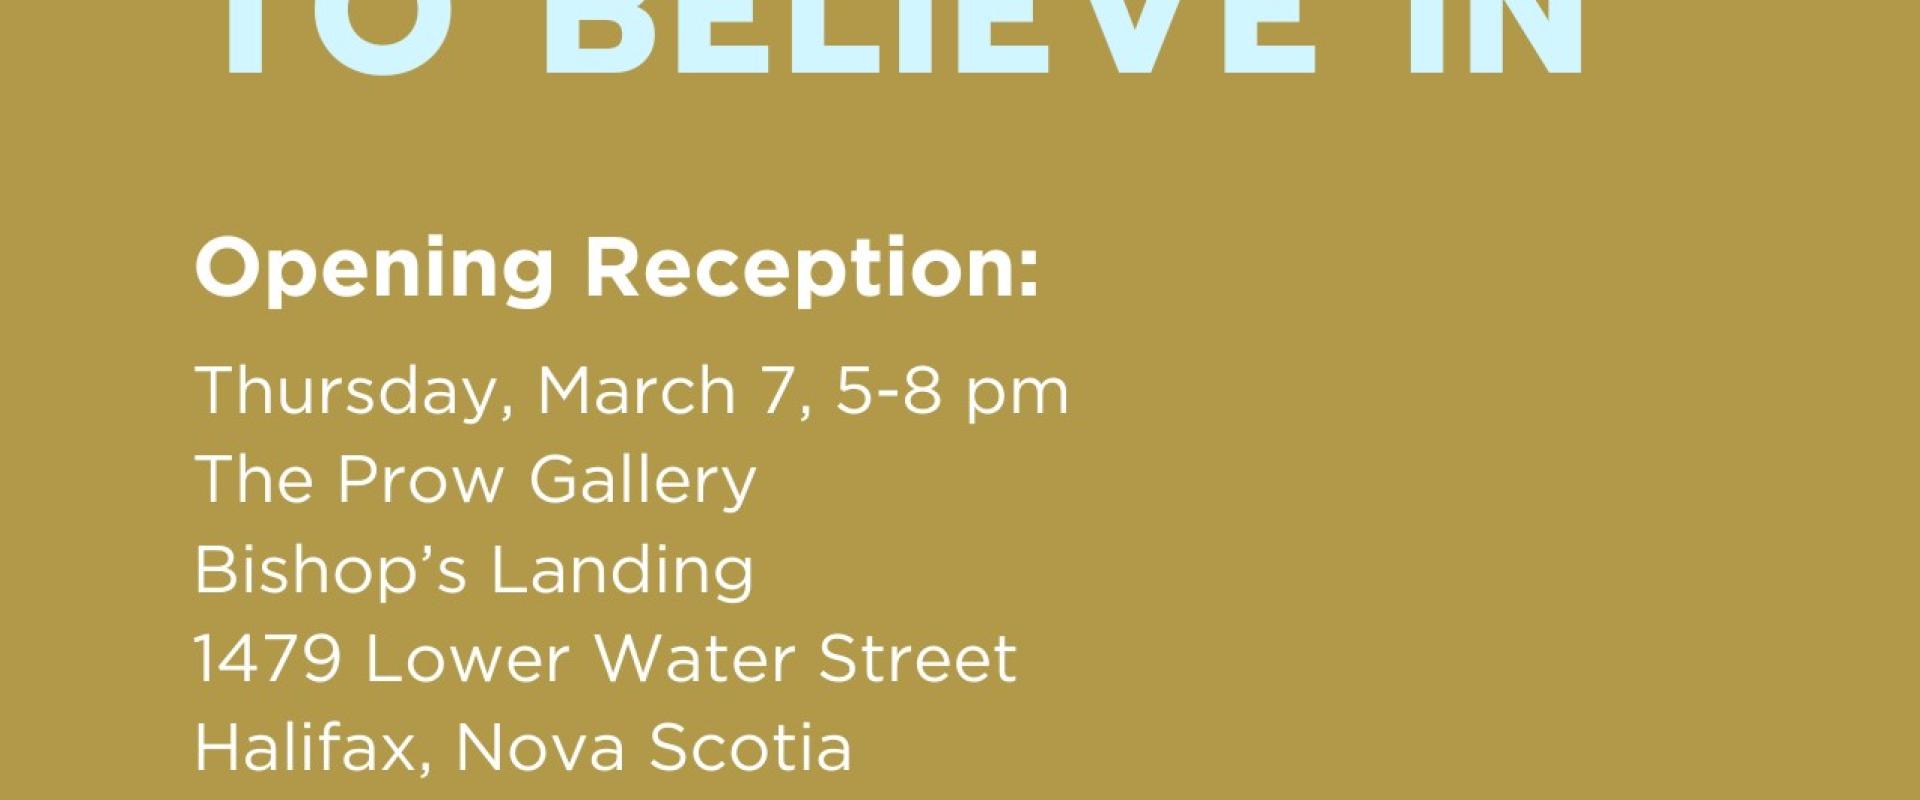 Paintings by Jenn Grant, Something to Believe In, March 7-30, 